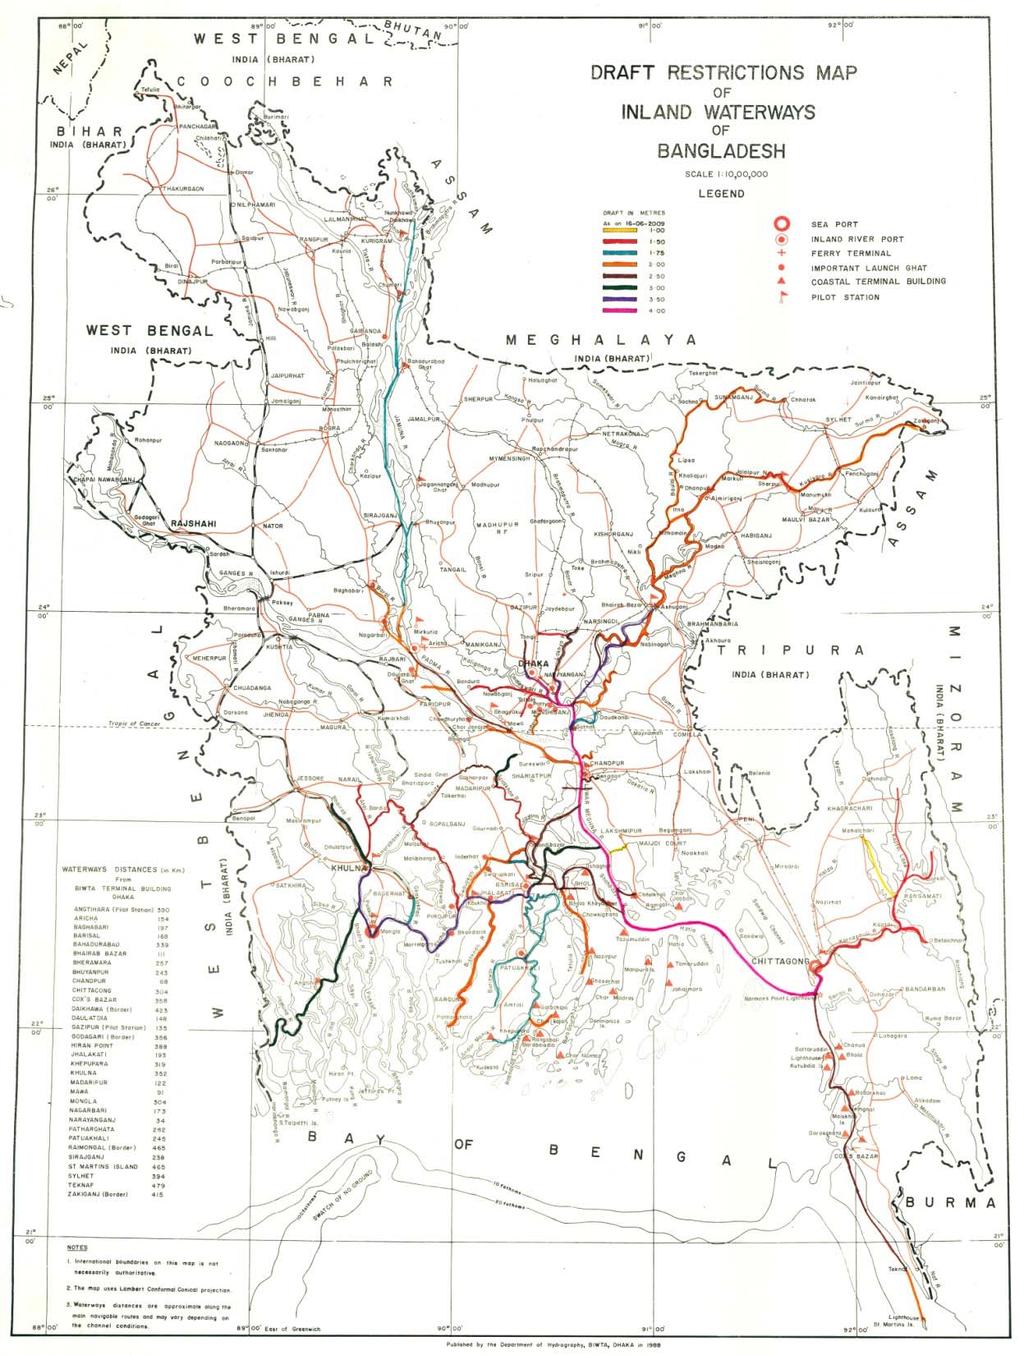 Bangladesh has one of the largest inland waterway networks in the world, connects almost all the country s major cities, towns, and commercial